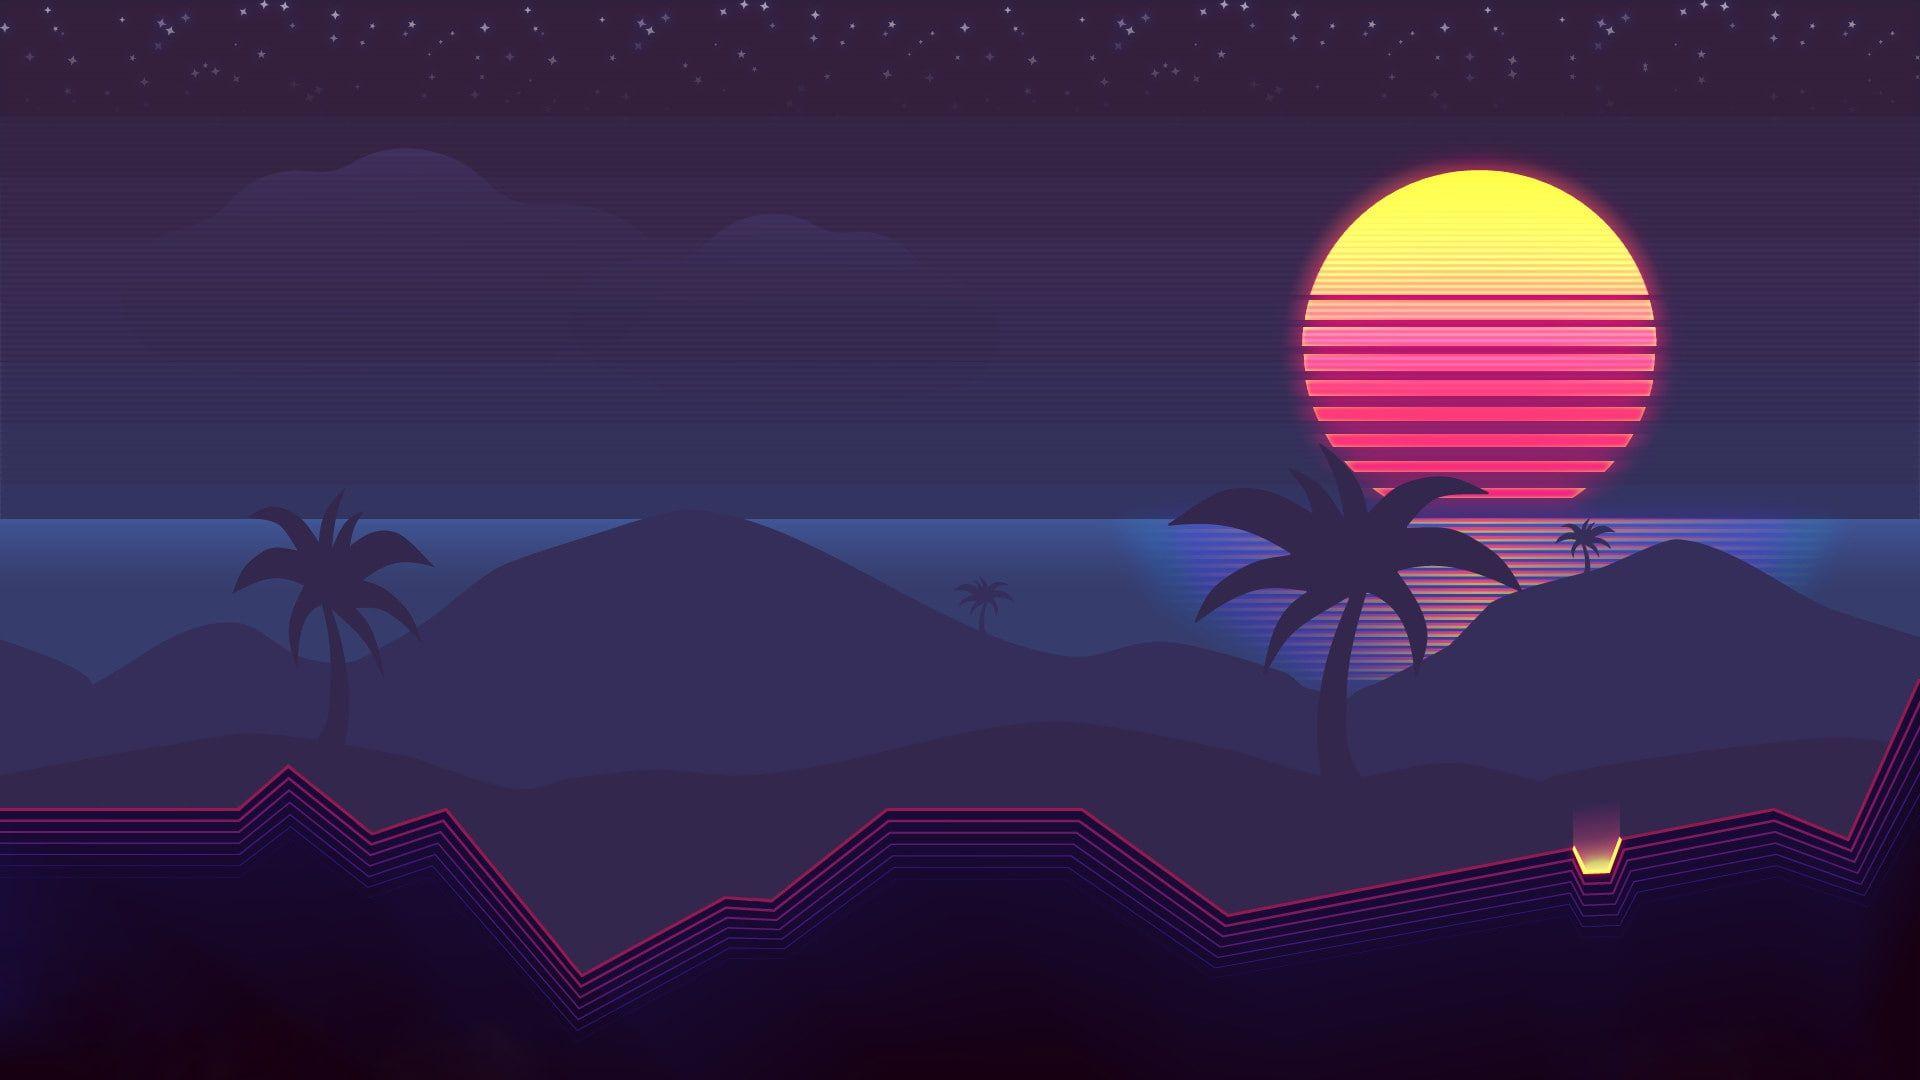 The sun #Music Palm trees #Background s #Neon 's #Synth #Retrowave #Synthwave New Retro Wave #Futuresynth. Neon wallpaper, Retro waves, Vaporwave wallpaper